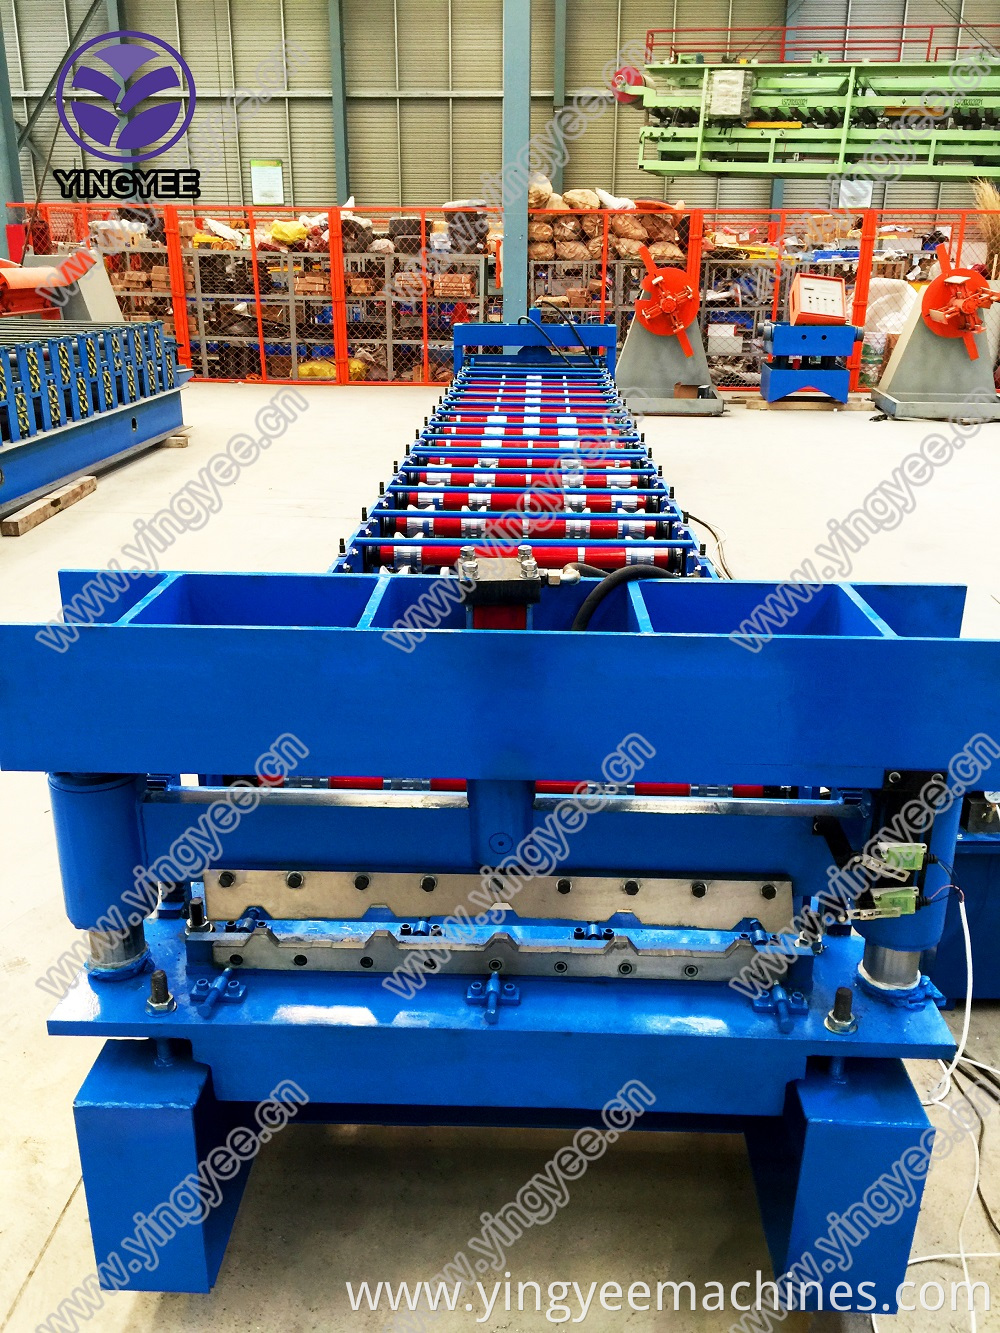 IBR trapezoid roof sheet roll forming machine /PLC control/hydrailic cutting /fast speed